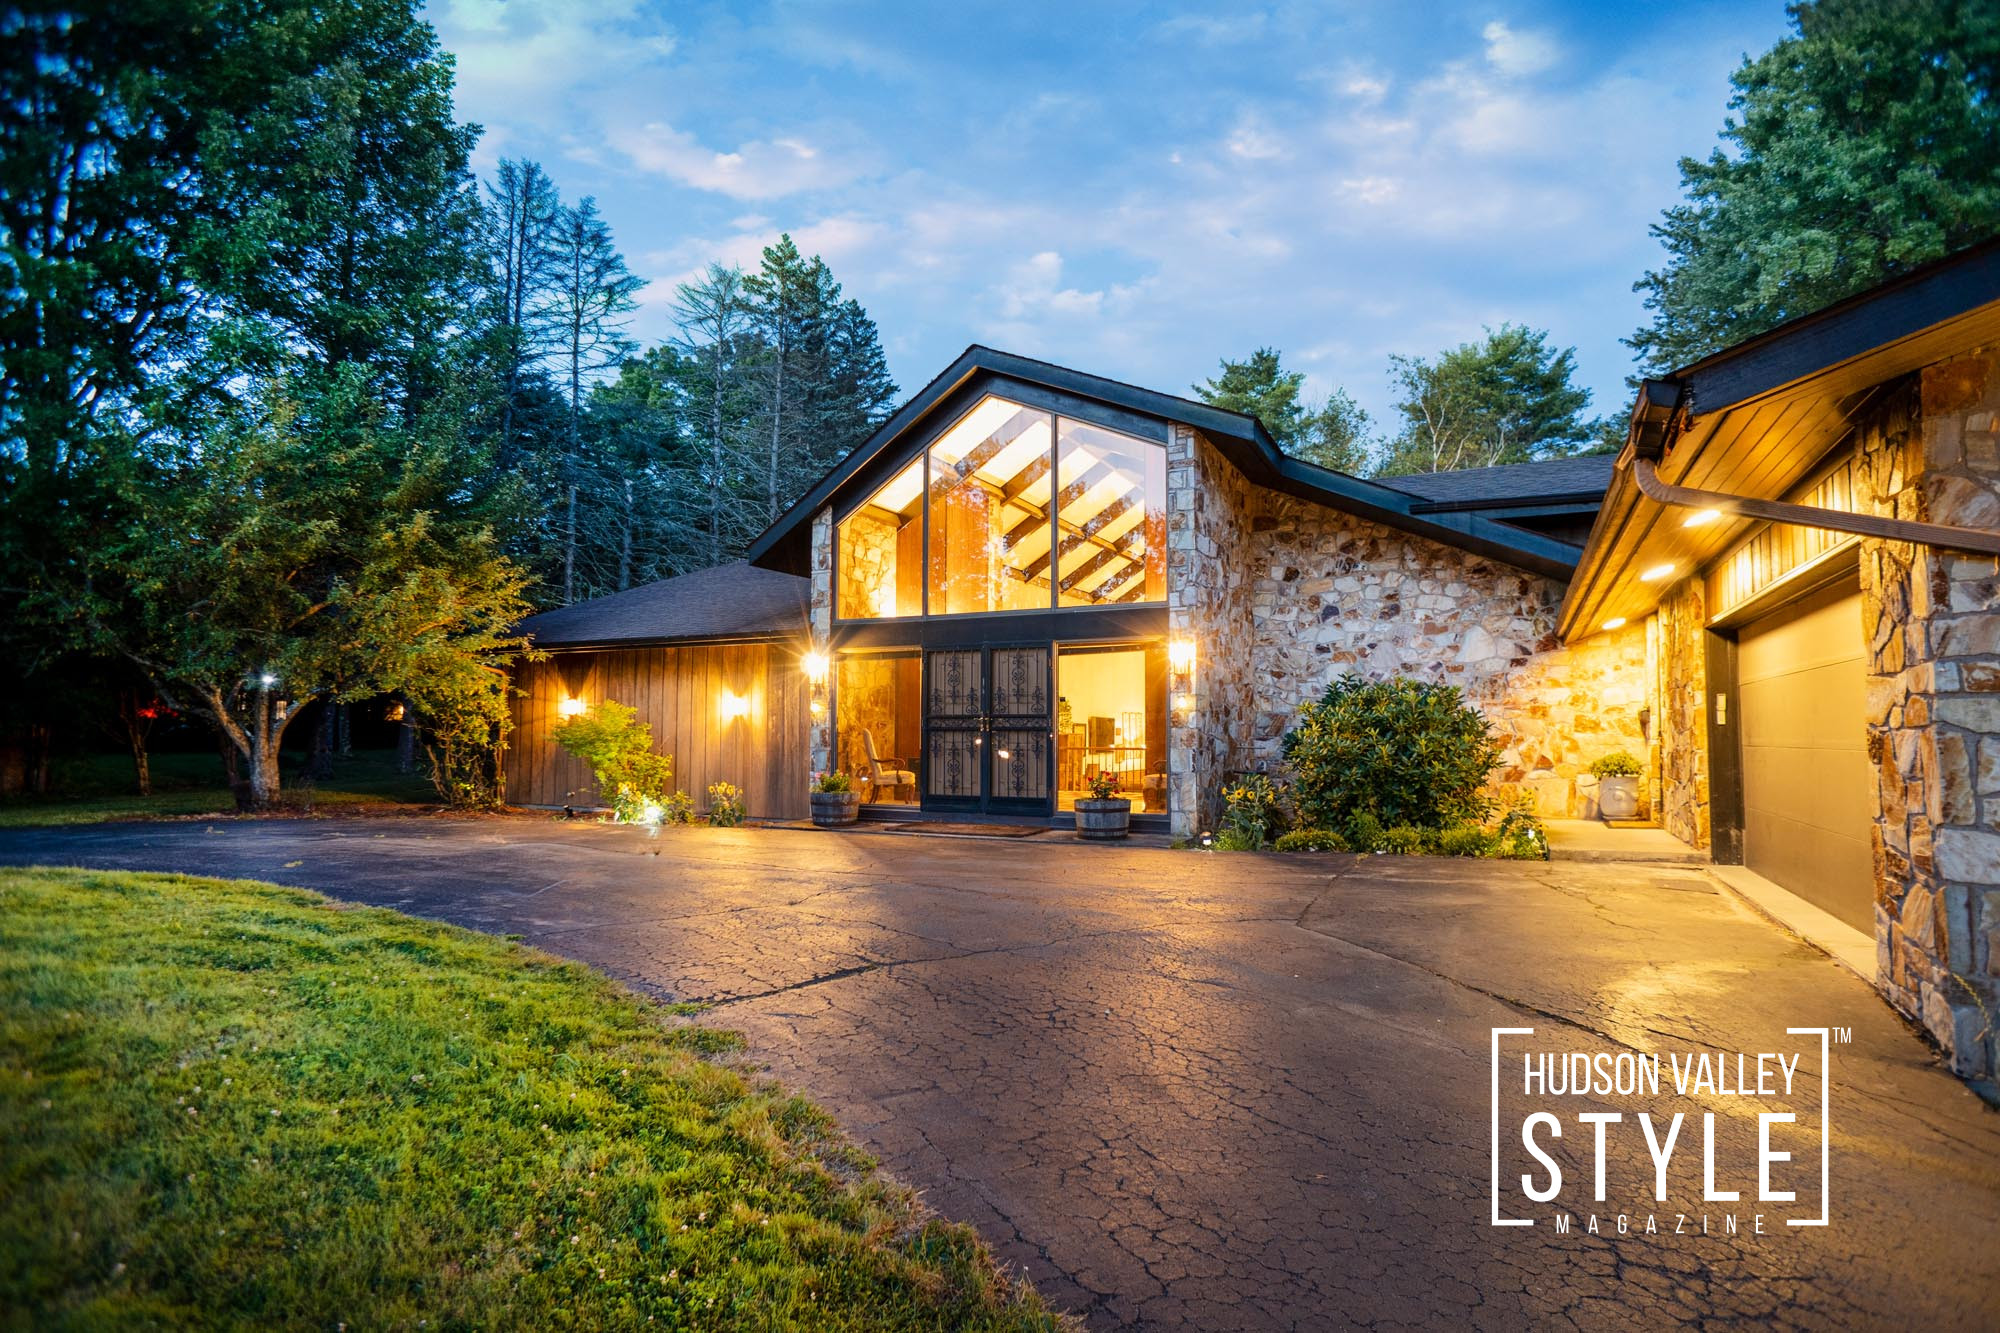 Airbnb Photography in Upstate New York and Long Island: Tips for Hiring the Best Photographer